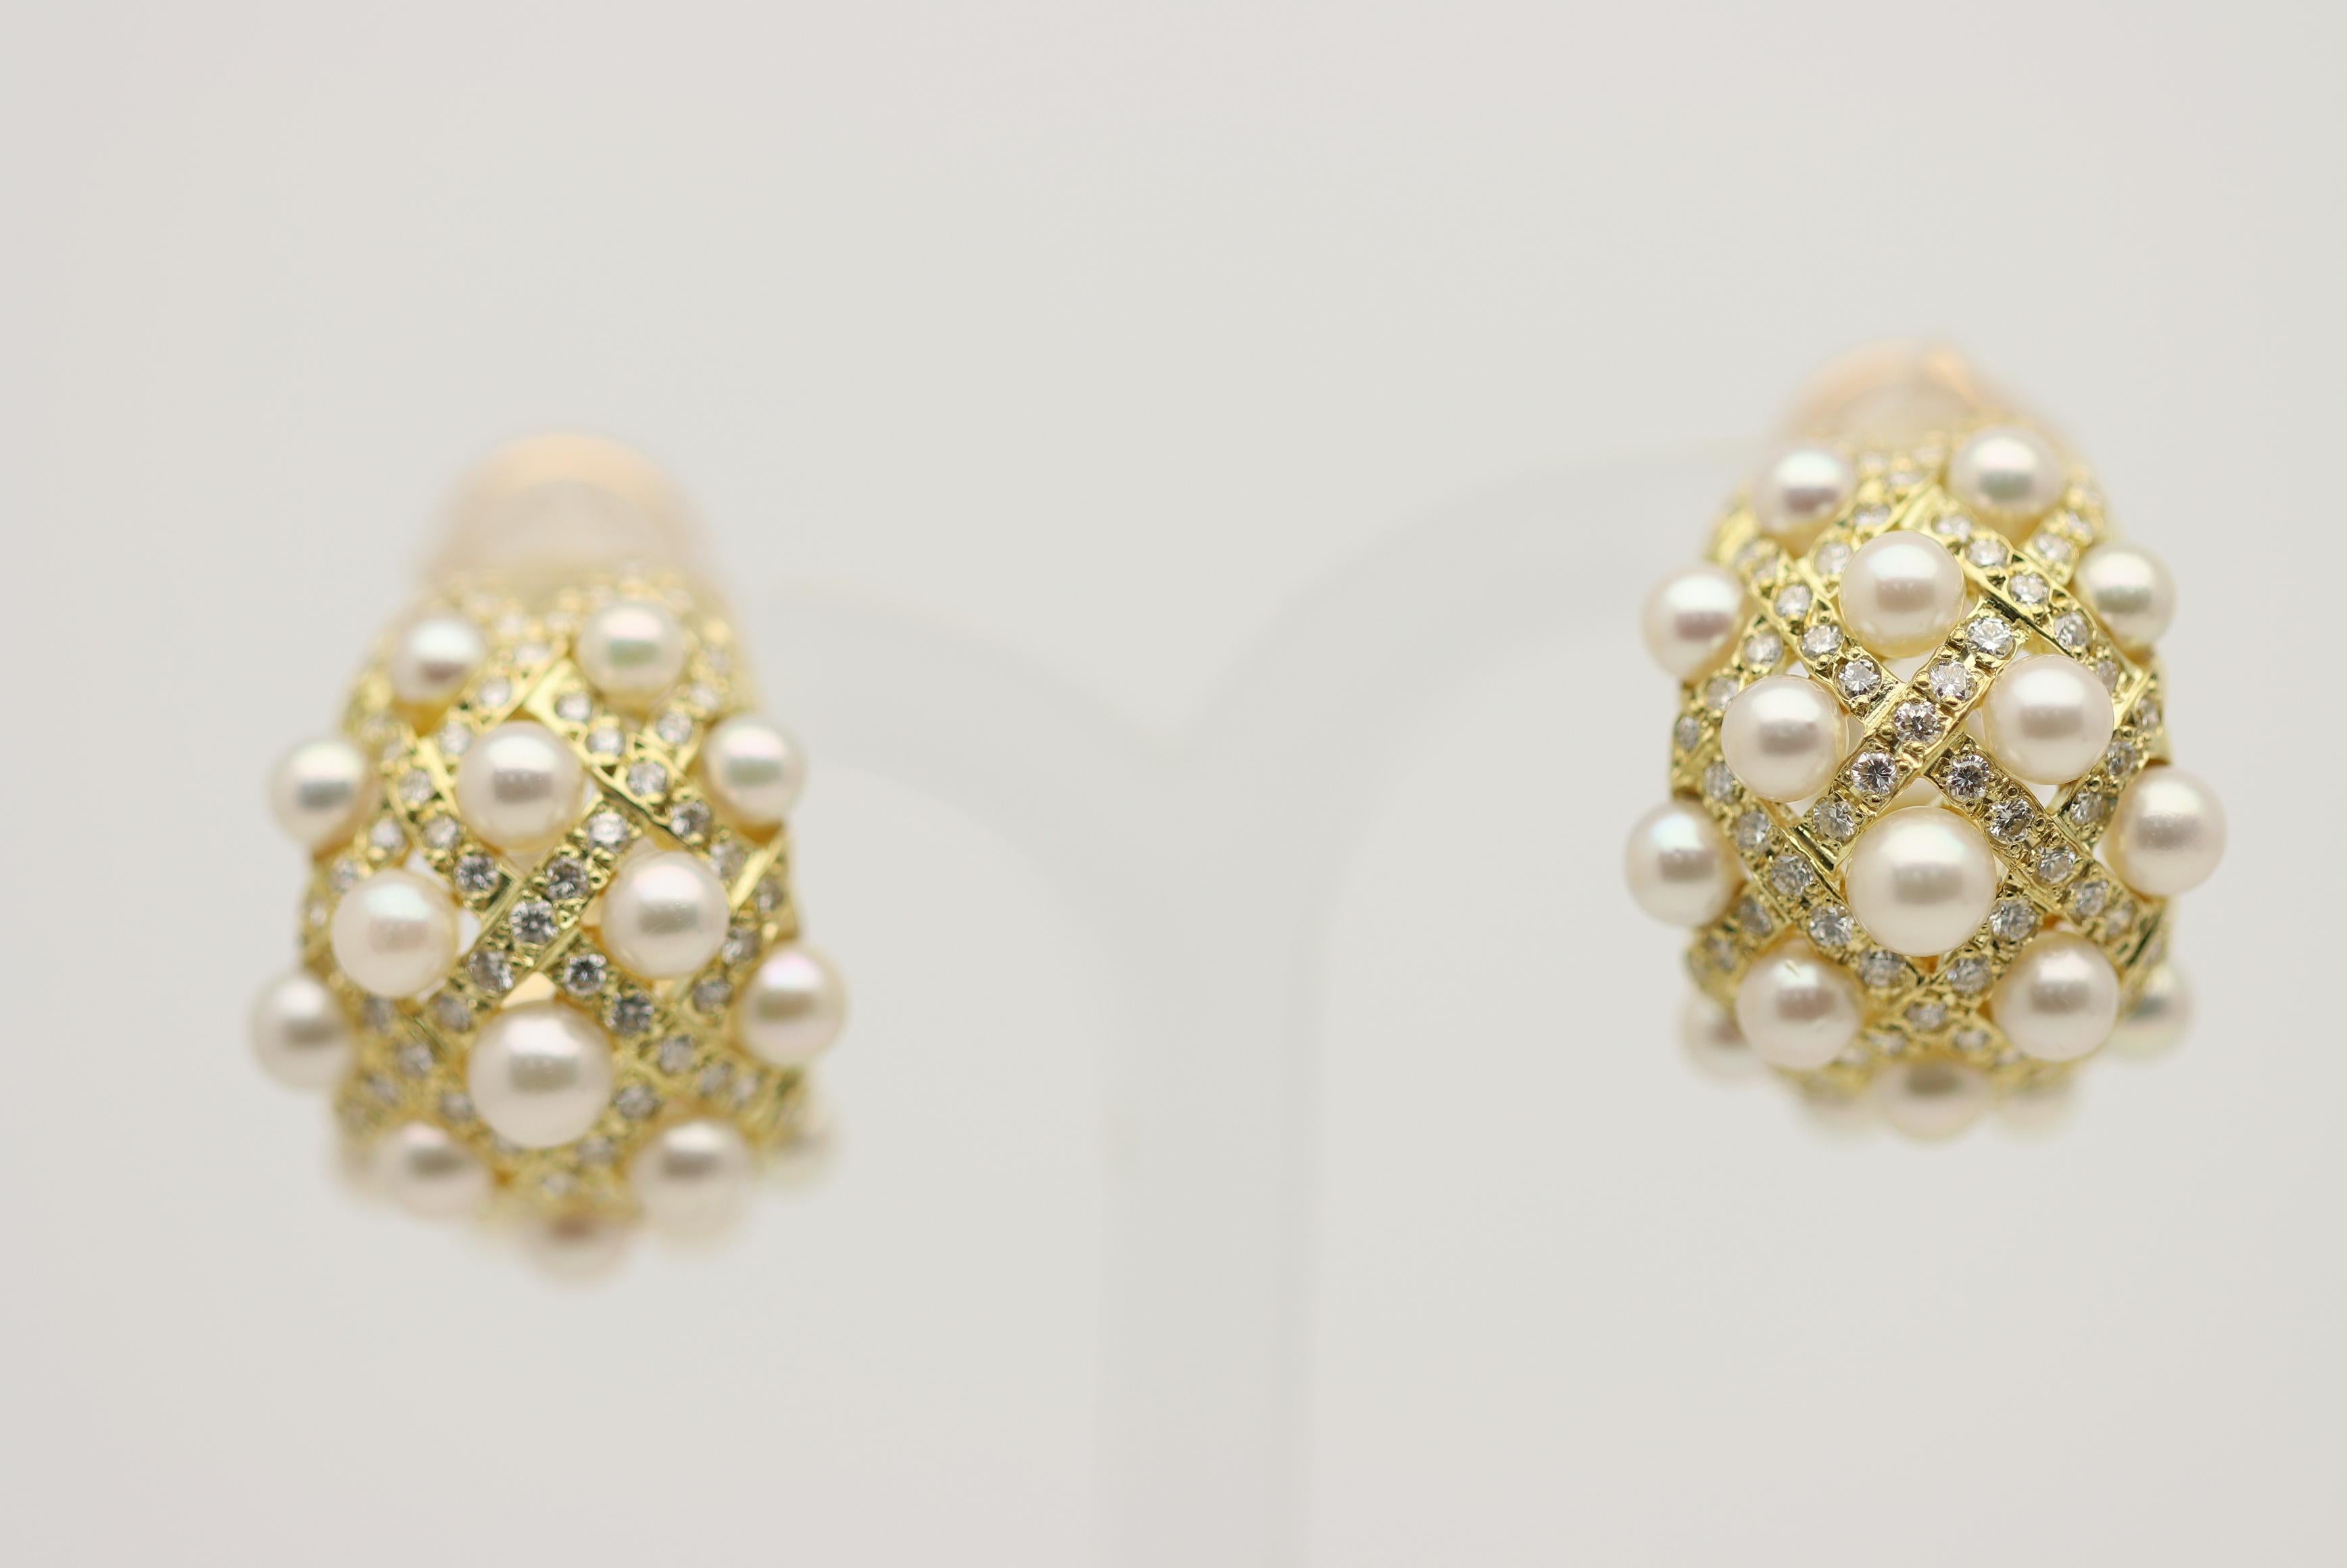 A chic and stylish pair of earrings featuring an array of fine akoya seed pearls and round brilliant-cut diamonds. The diamonds weigh a total of 1.10 carats and are set across the earrings in interesting rows. Between the openings are fine bright